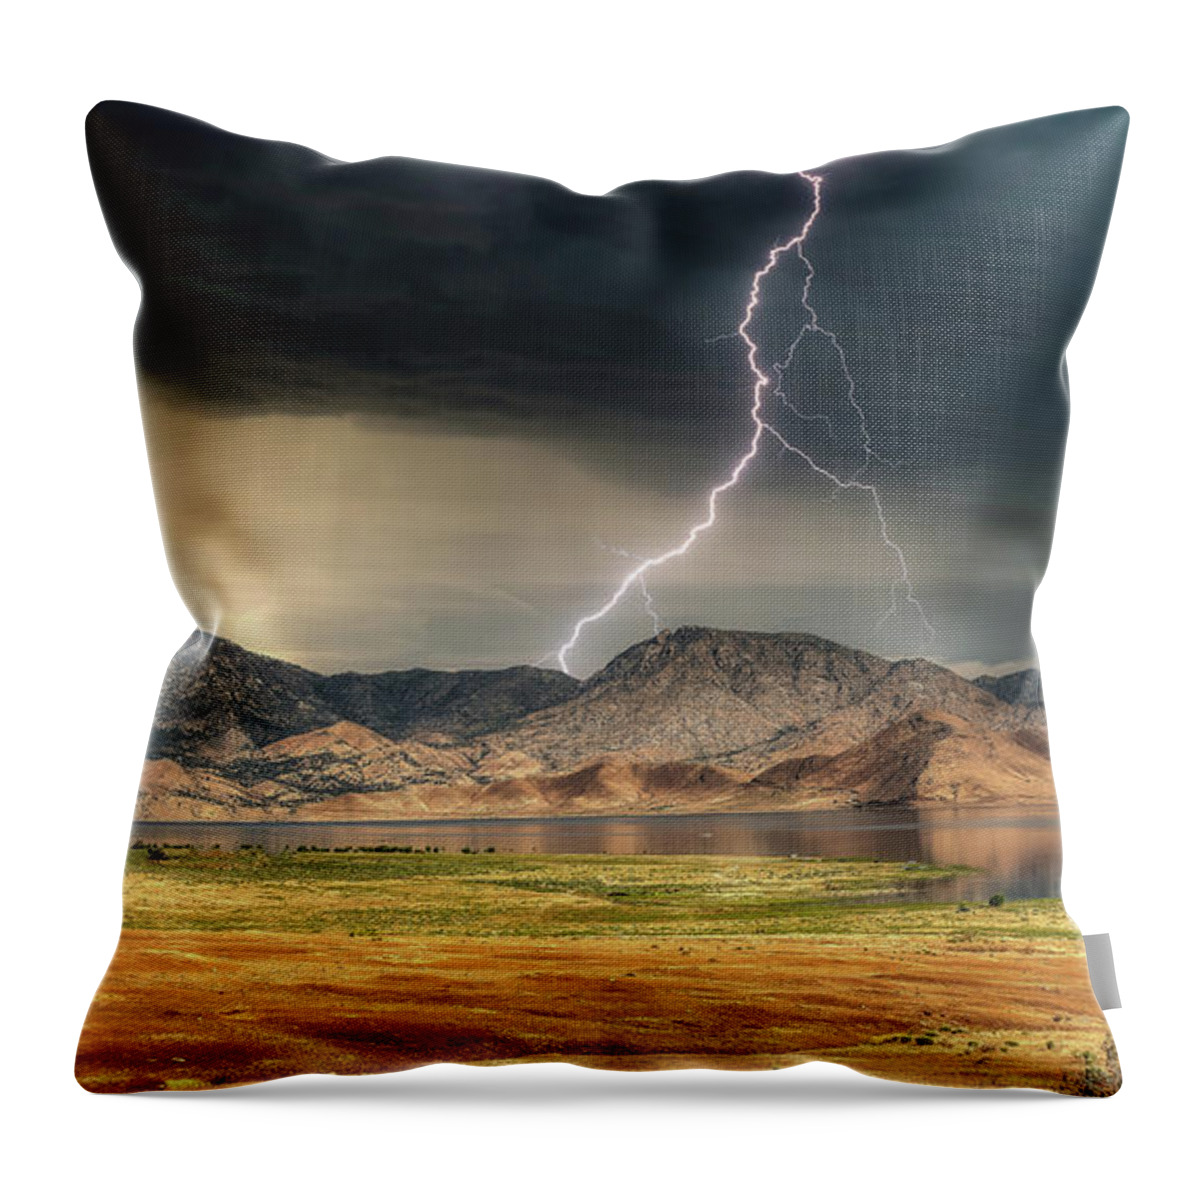  Throw Pillow featuring the photograph Lightning Strike in Colorado by G Lamar Yancy